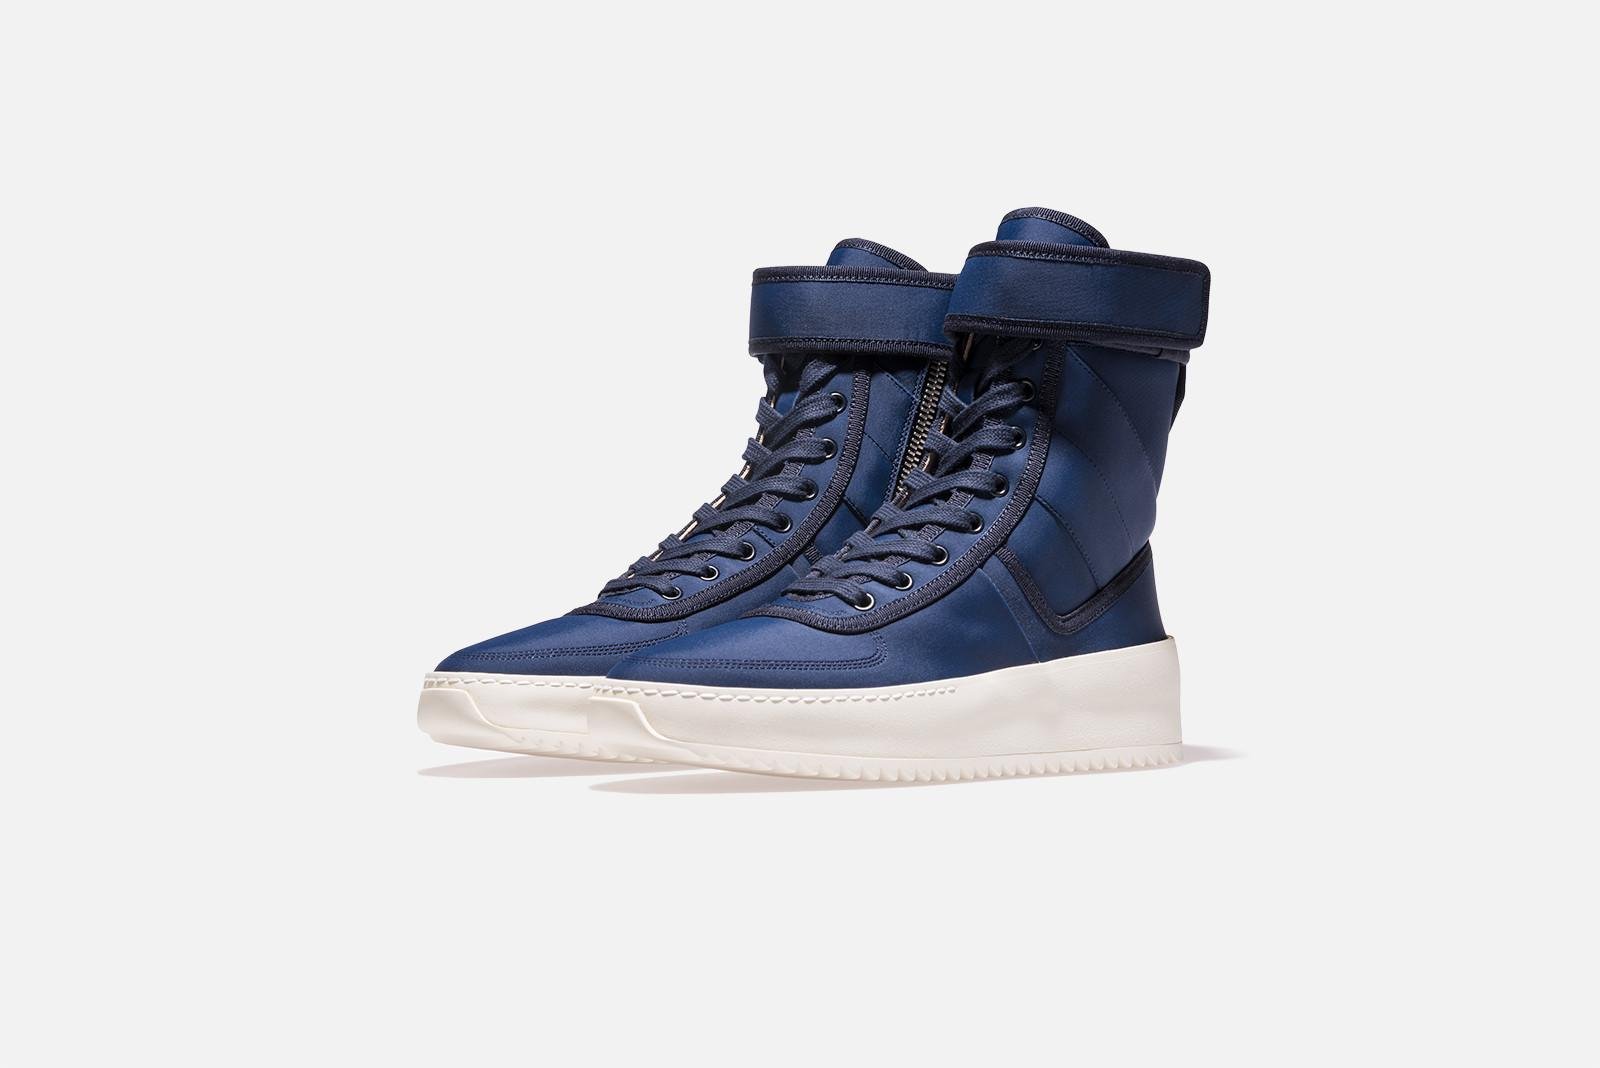 Kith x Fear of God Military Sneaker 'New York Blue'